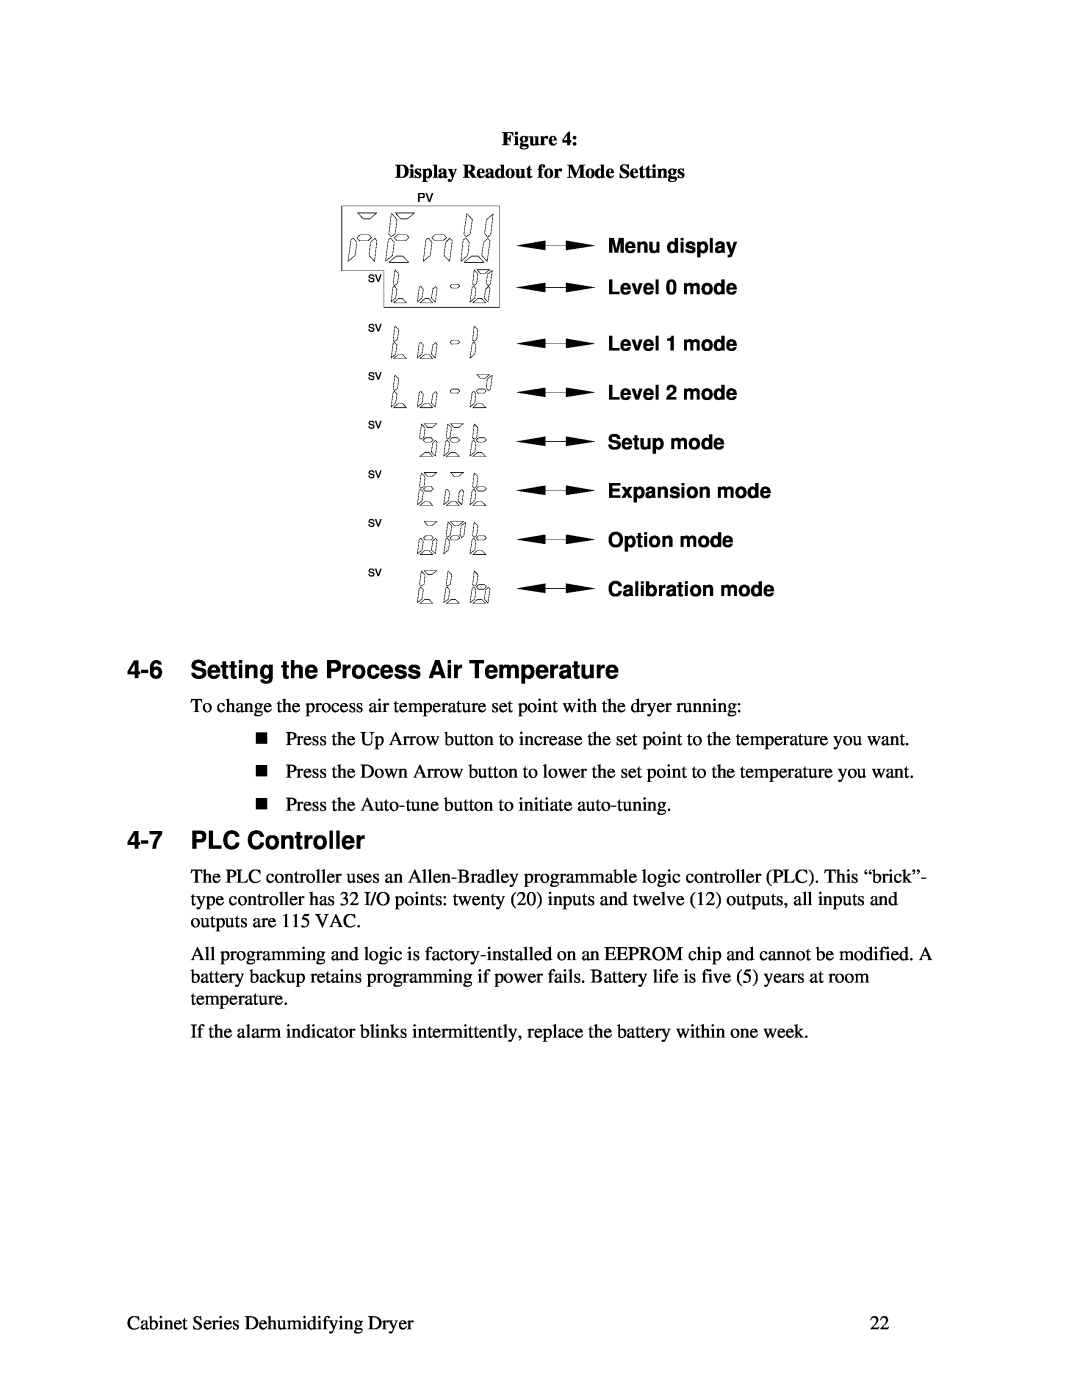 Sterling Plumbing 150 4-6Setting the Process Air Temperature, 4-7PLC Controller, Figure Display Readout for Mode Settings 